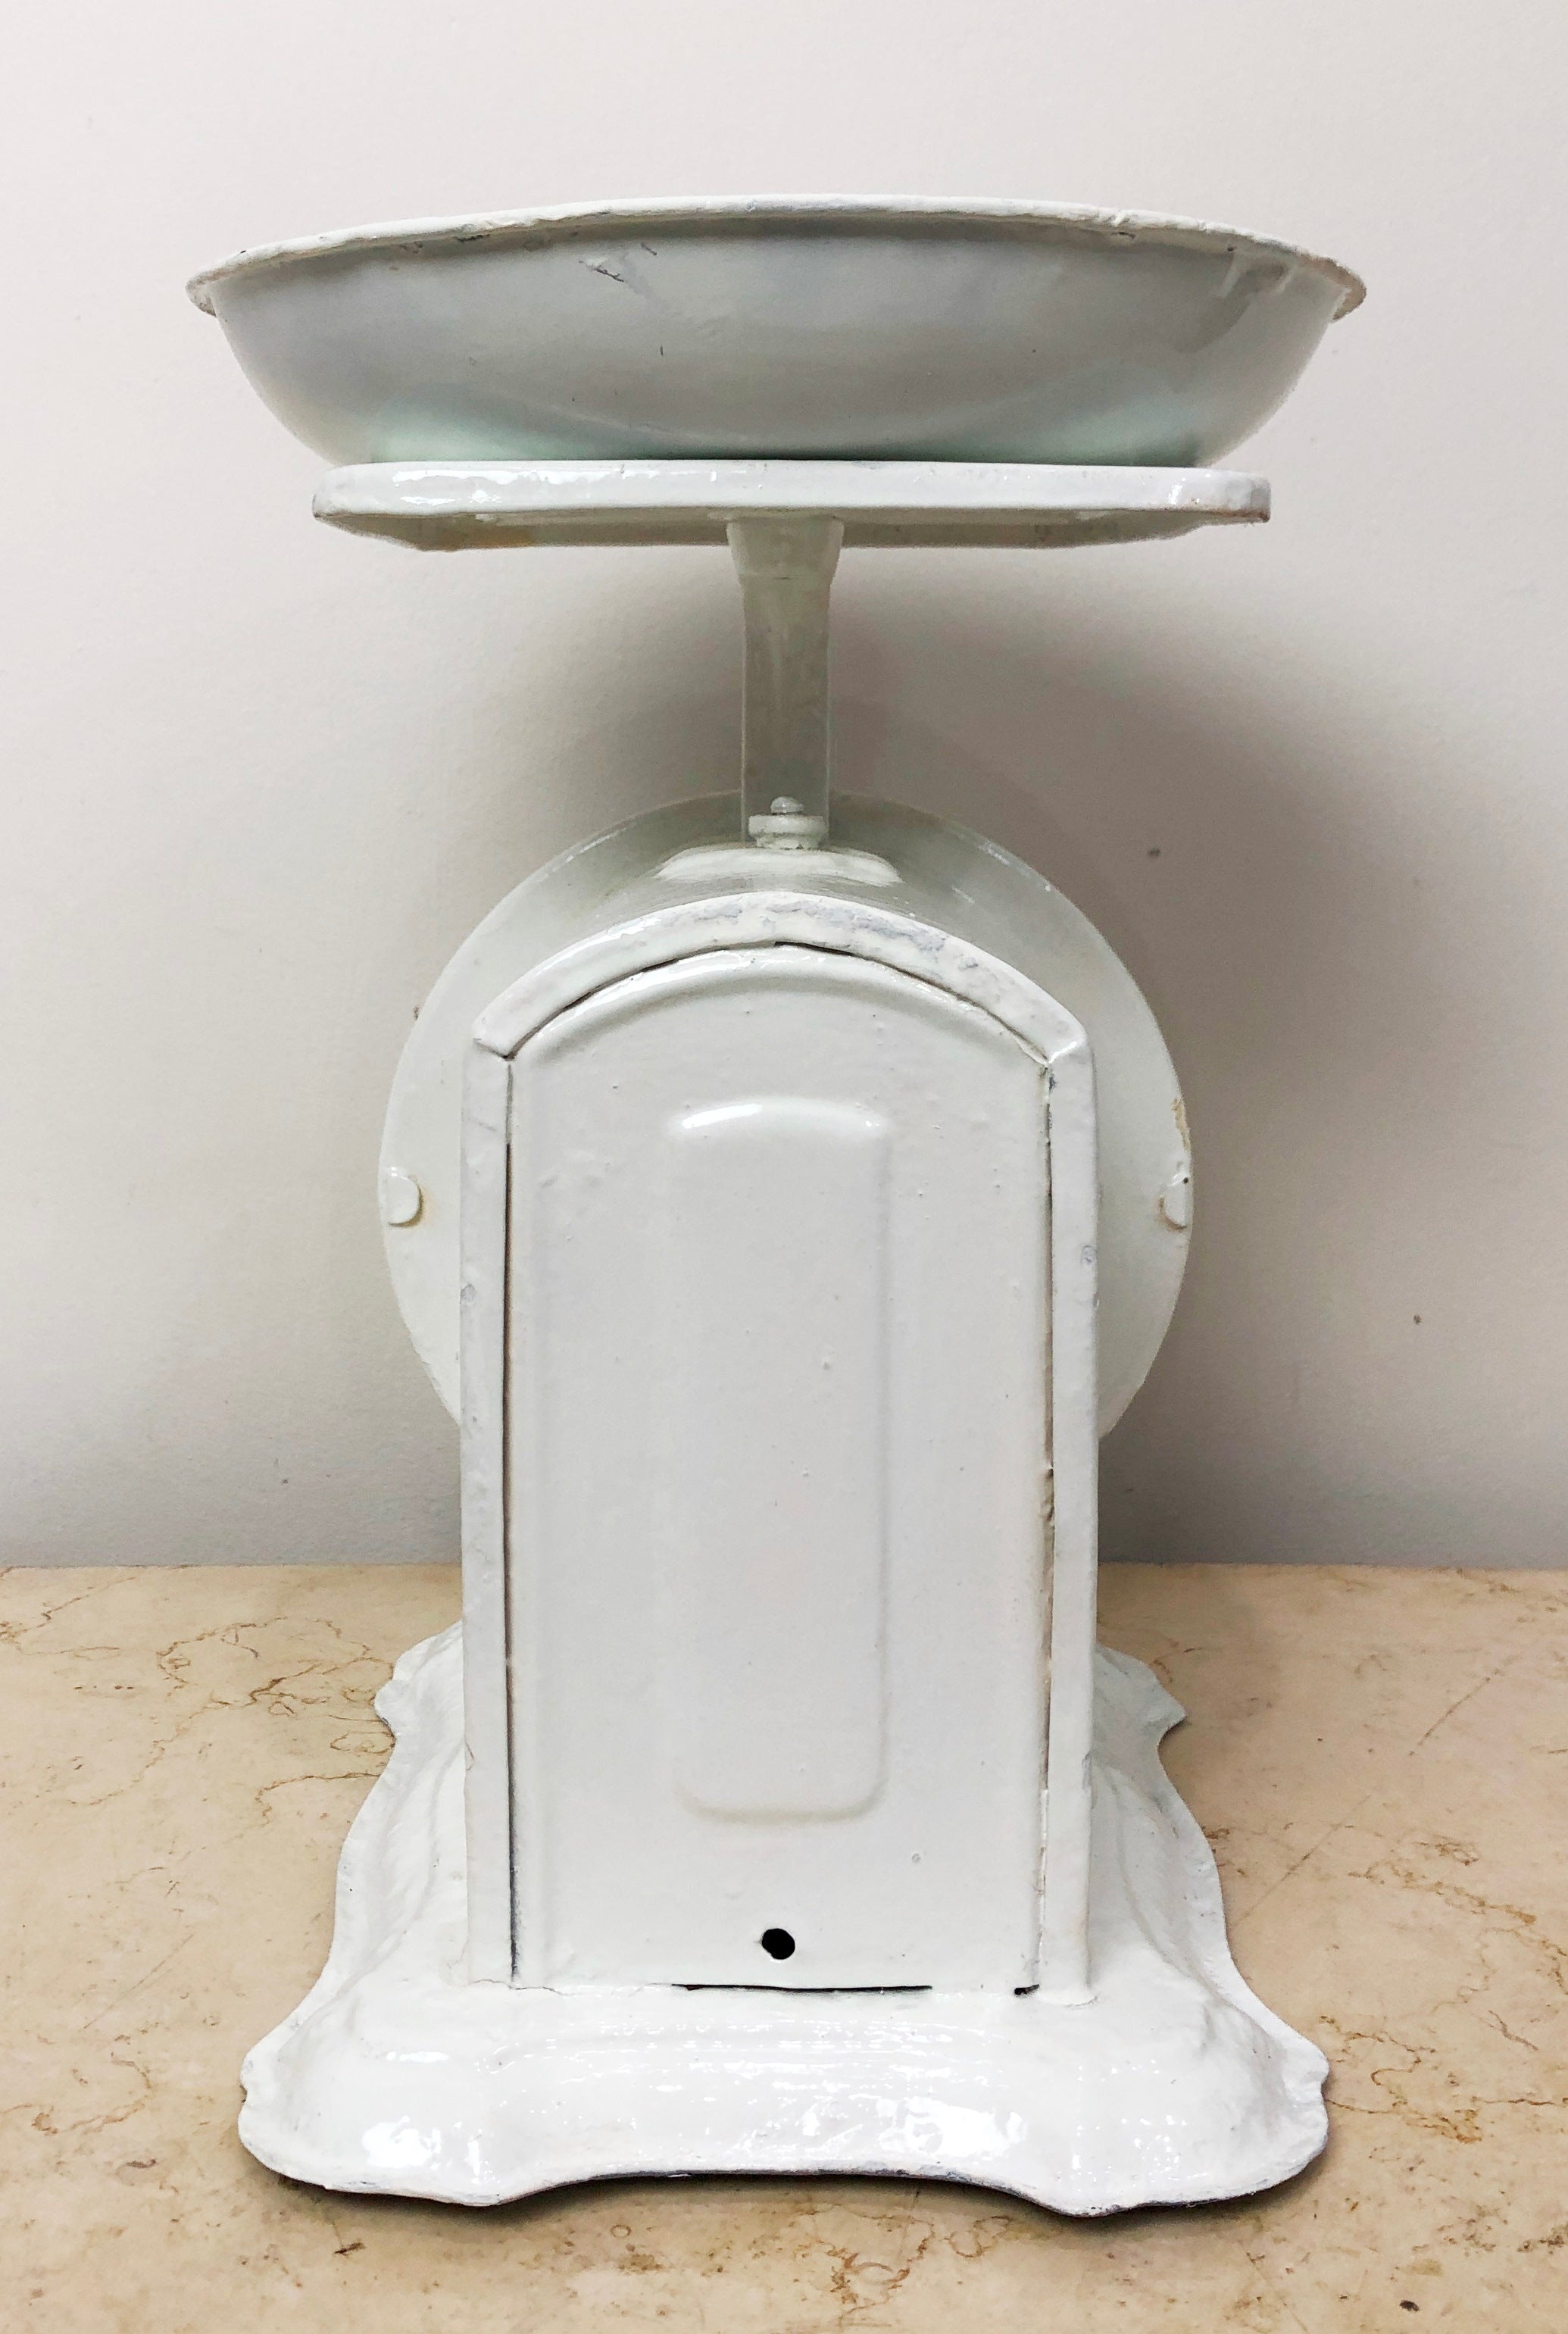 Antique Landers Frary & Clark Family Kitchen Scale | eXibit collection